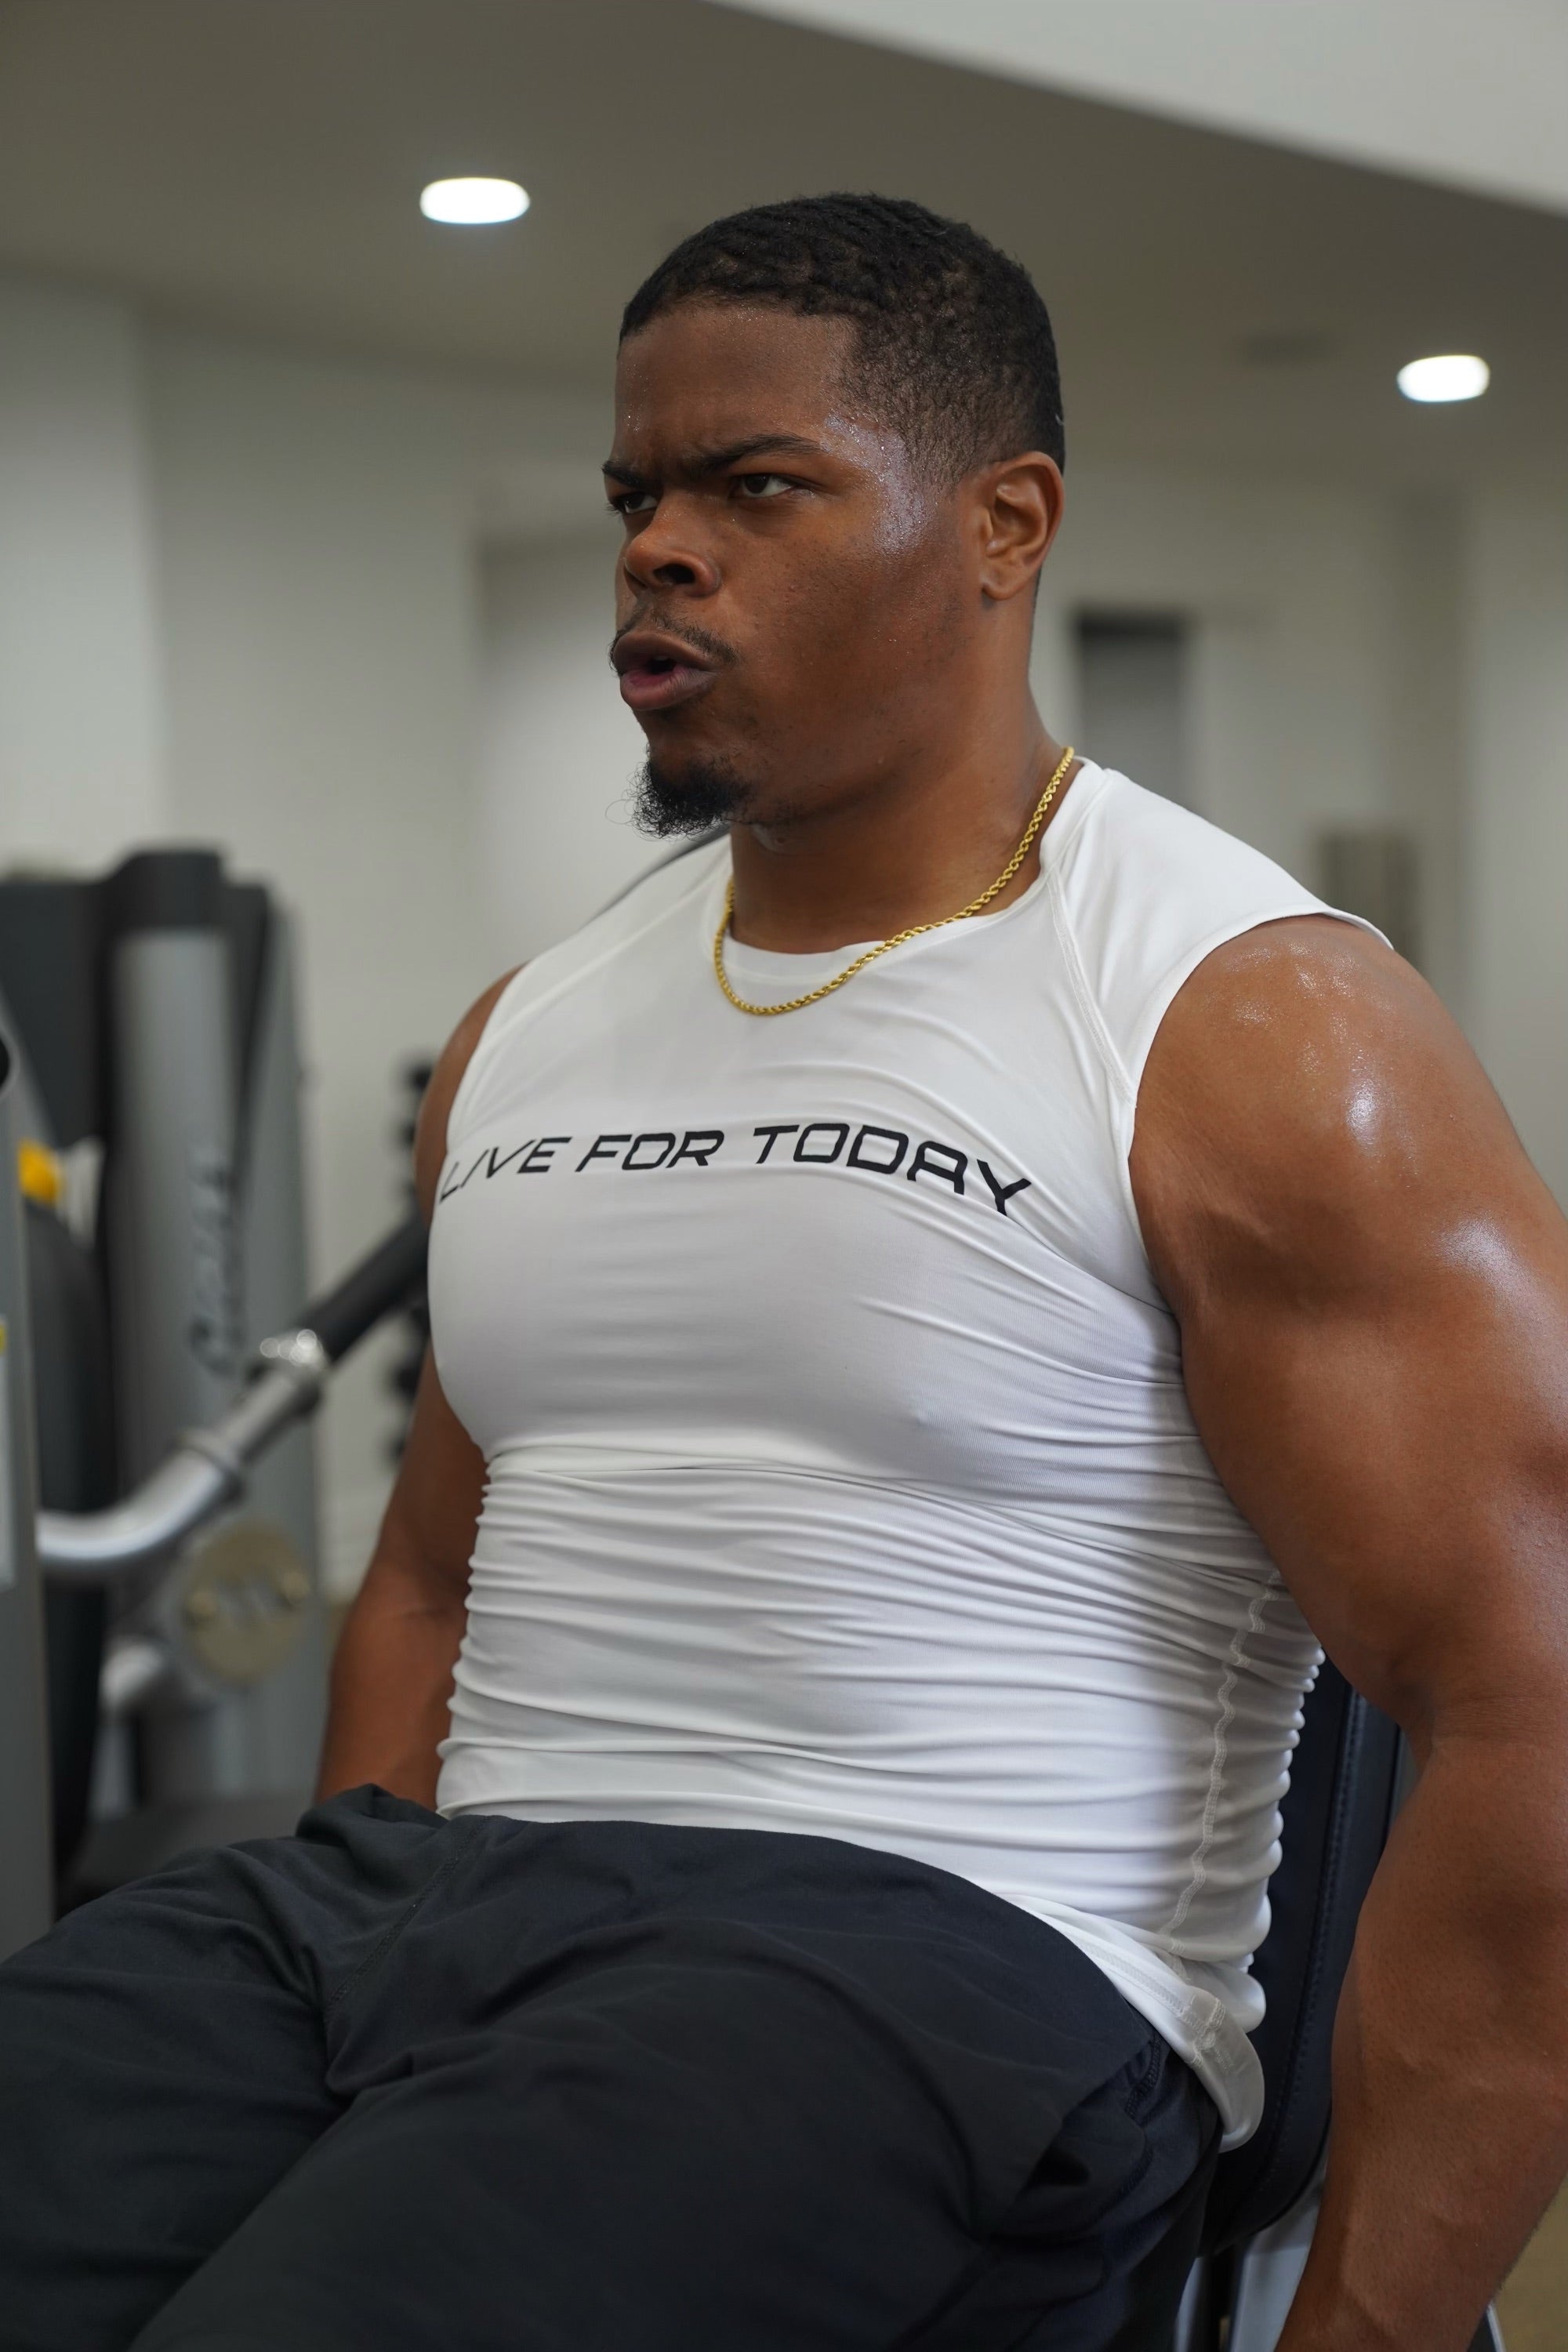 LFT Sleeveless Compression Shirt – Live For Today Clothing